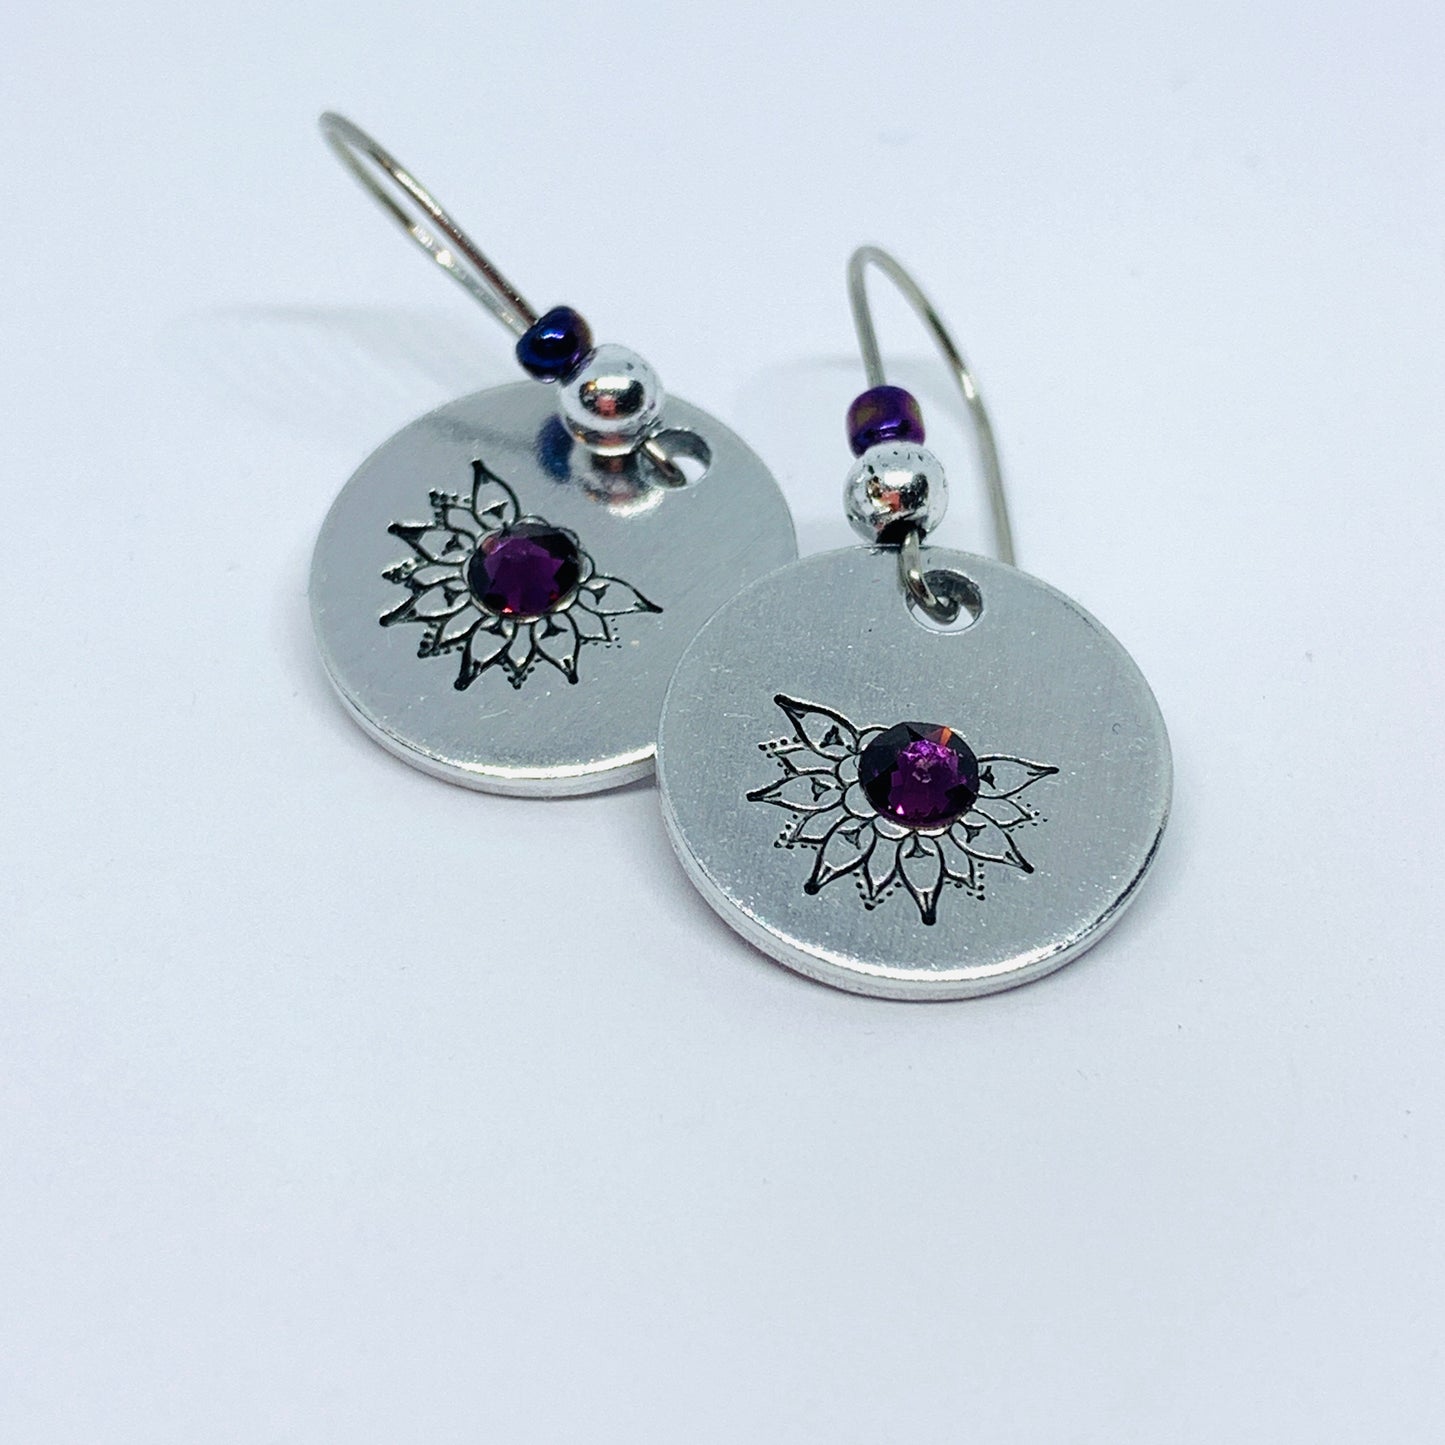 Intricate Mandala with Swarovski Crystals - Hand Stamped Earrings